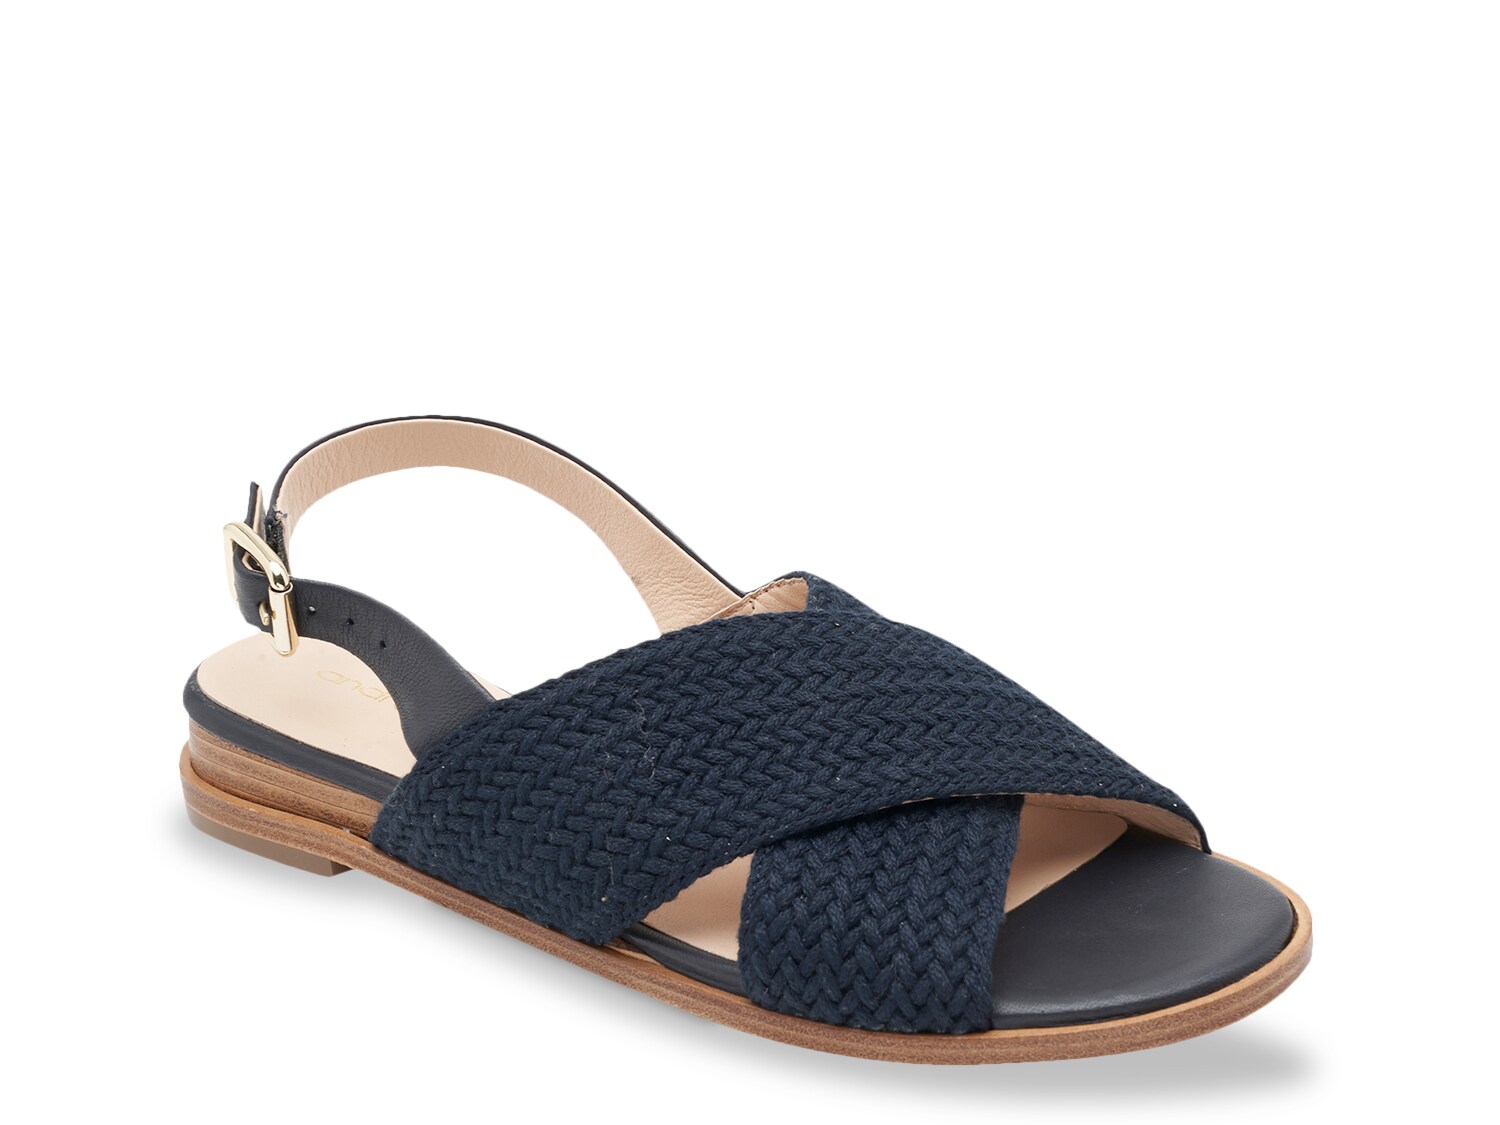 Andre Assous Ginny Sandal - Free Shipping | DSW